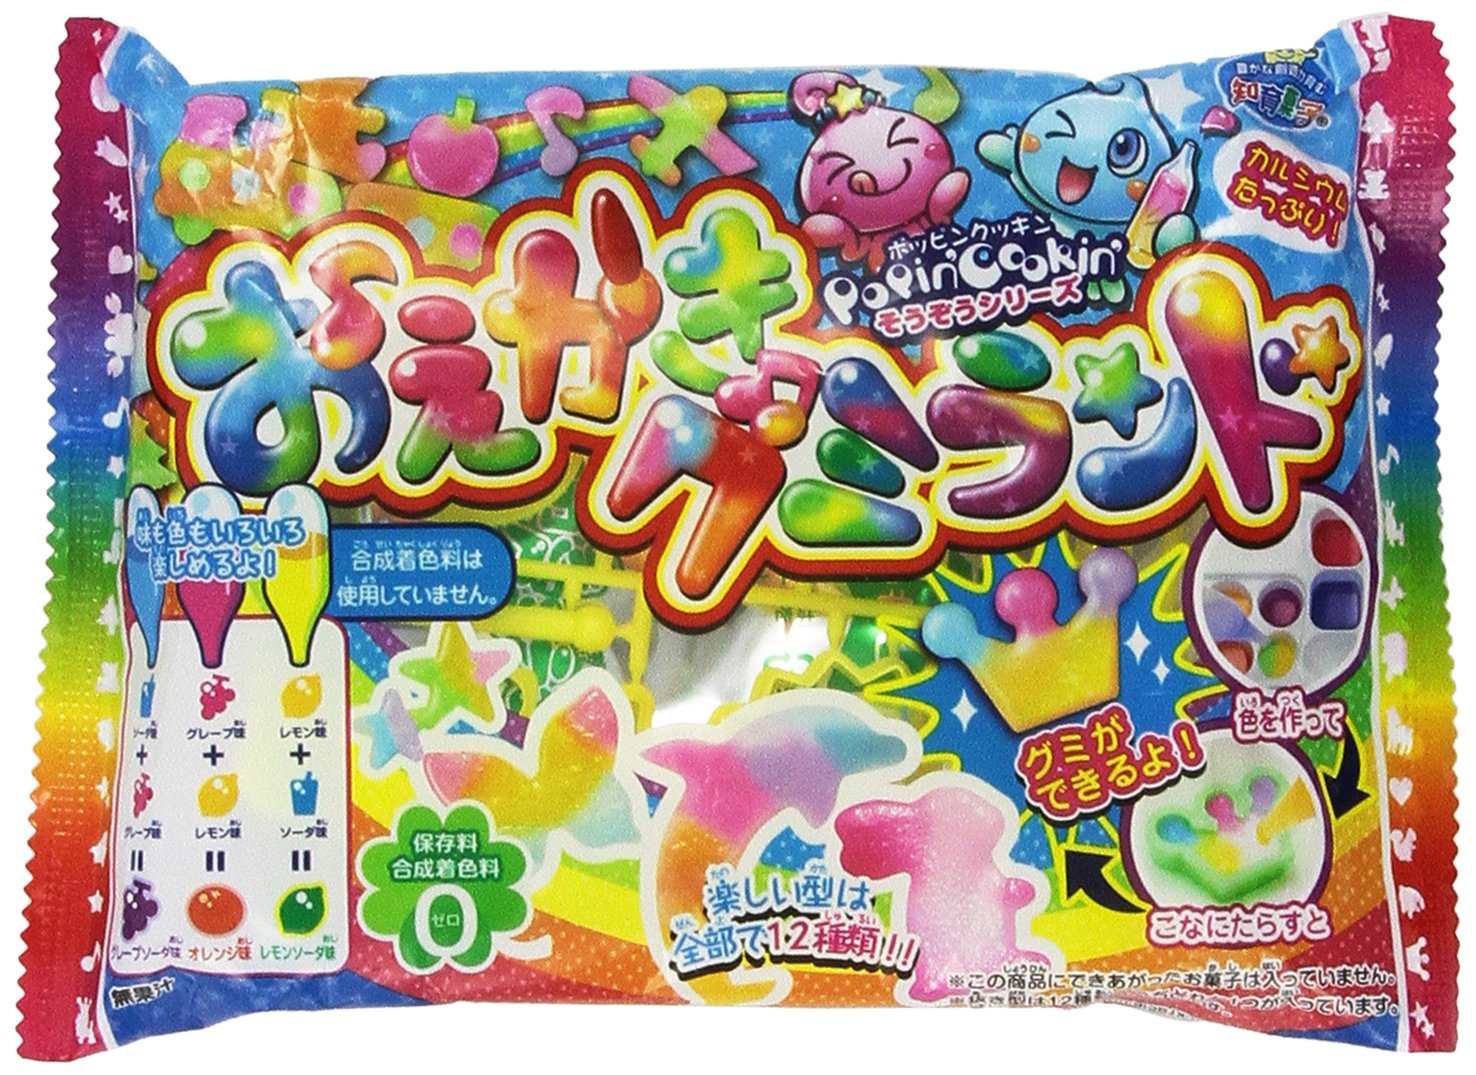 popin cookin english instructions festival